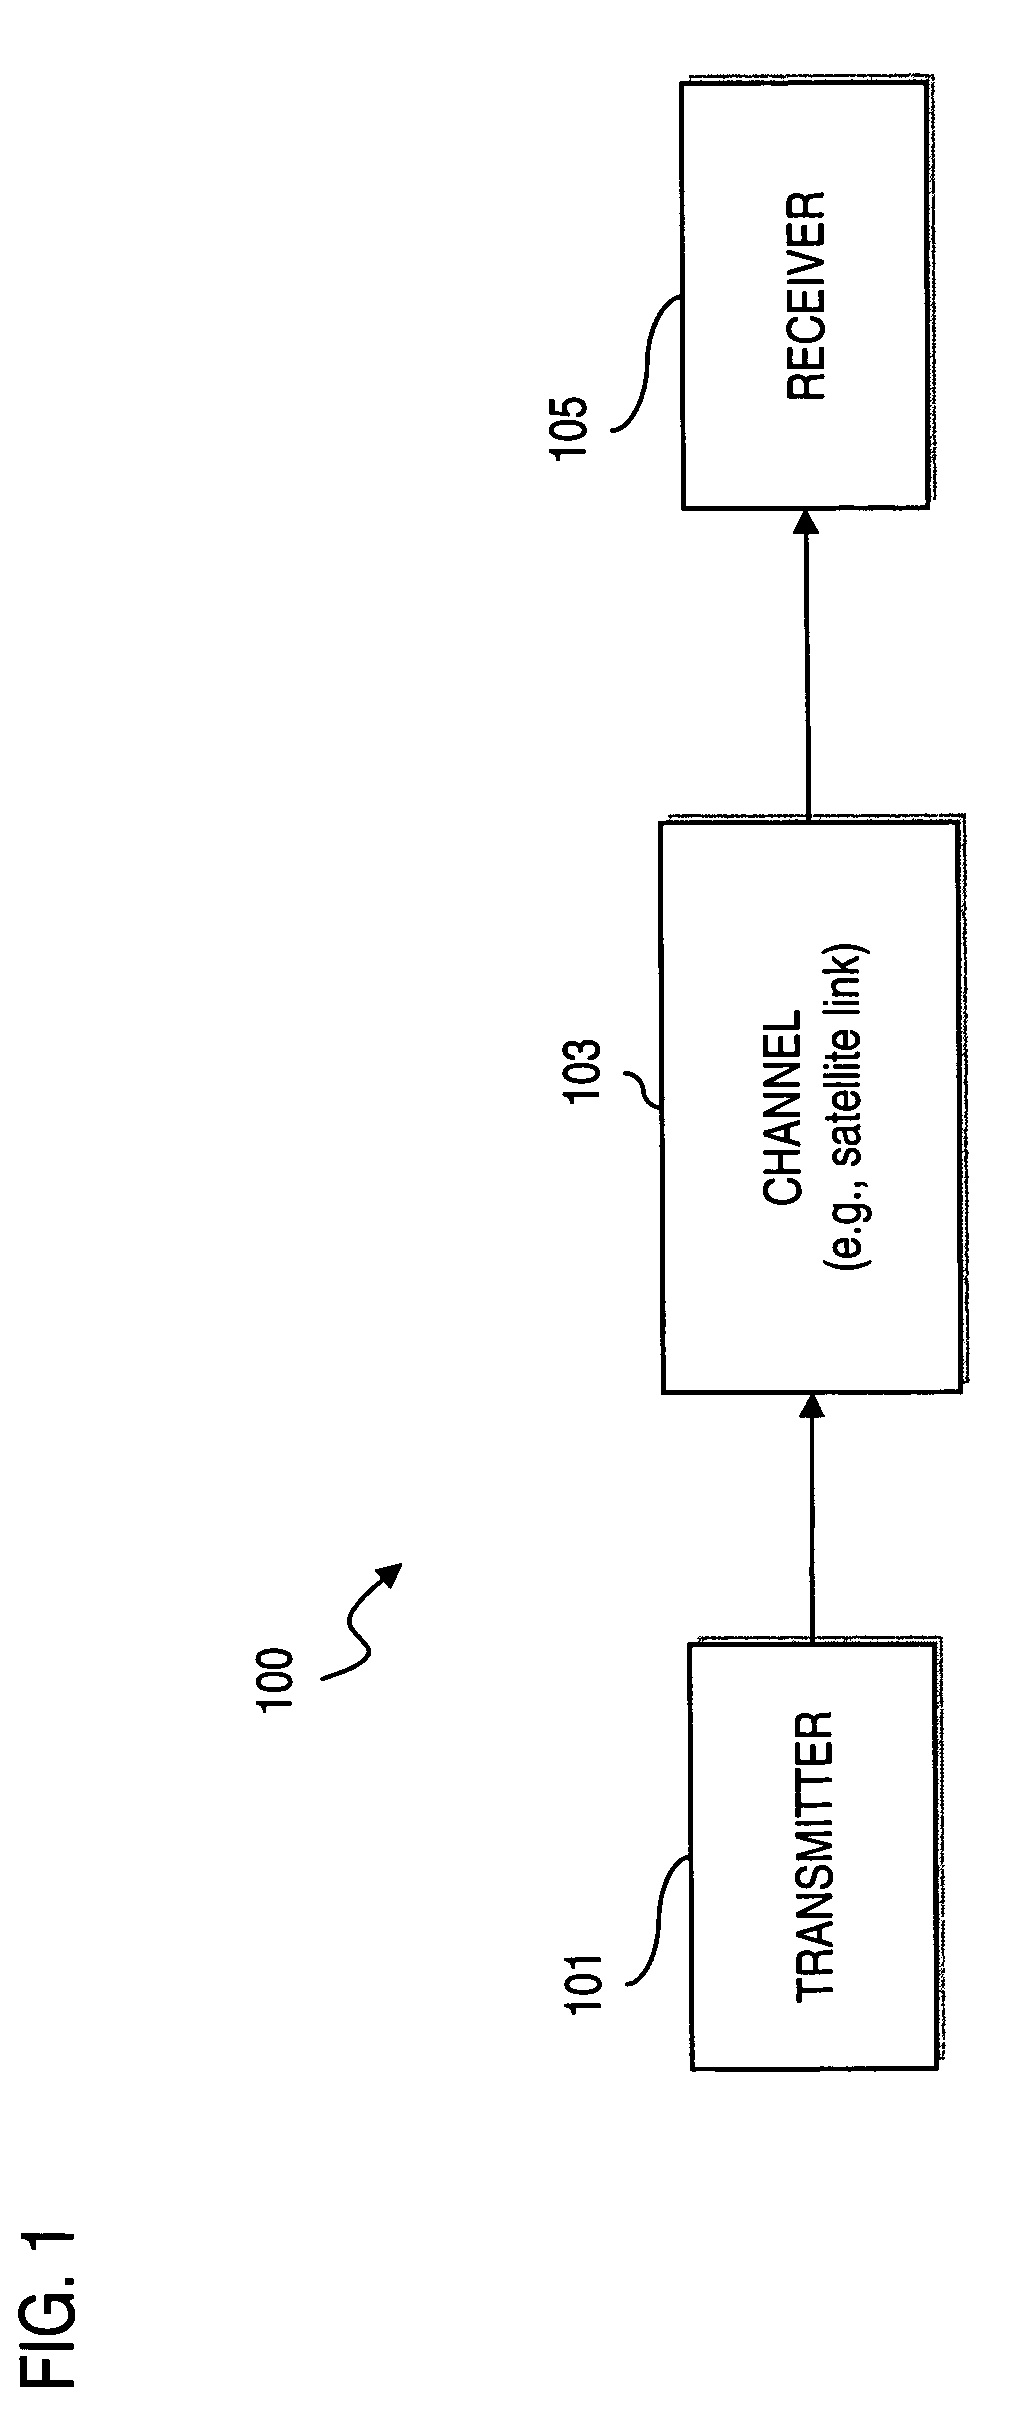 Method and system for providing short block length low density parity check (LDPC) codes